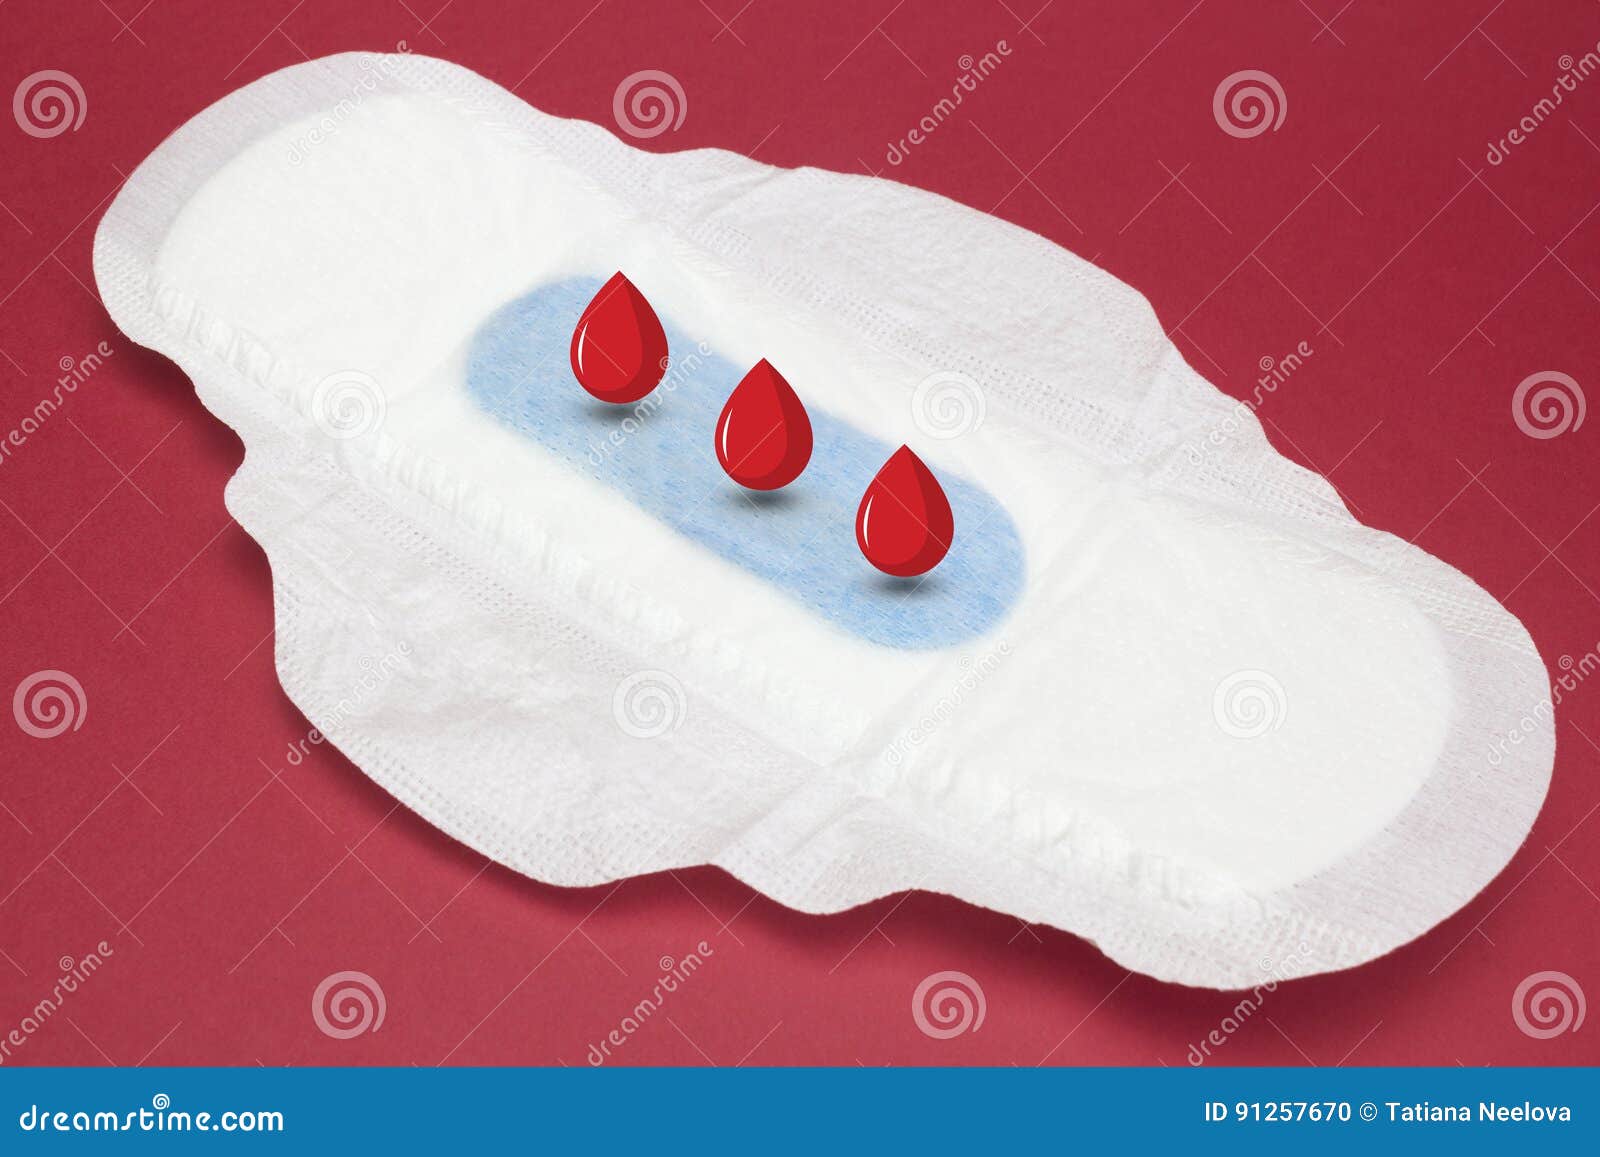 menstruation sanitary soft pads and tampons for woman hygiene protection and digital drawn blood drops. woman critical days, gynec